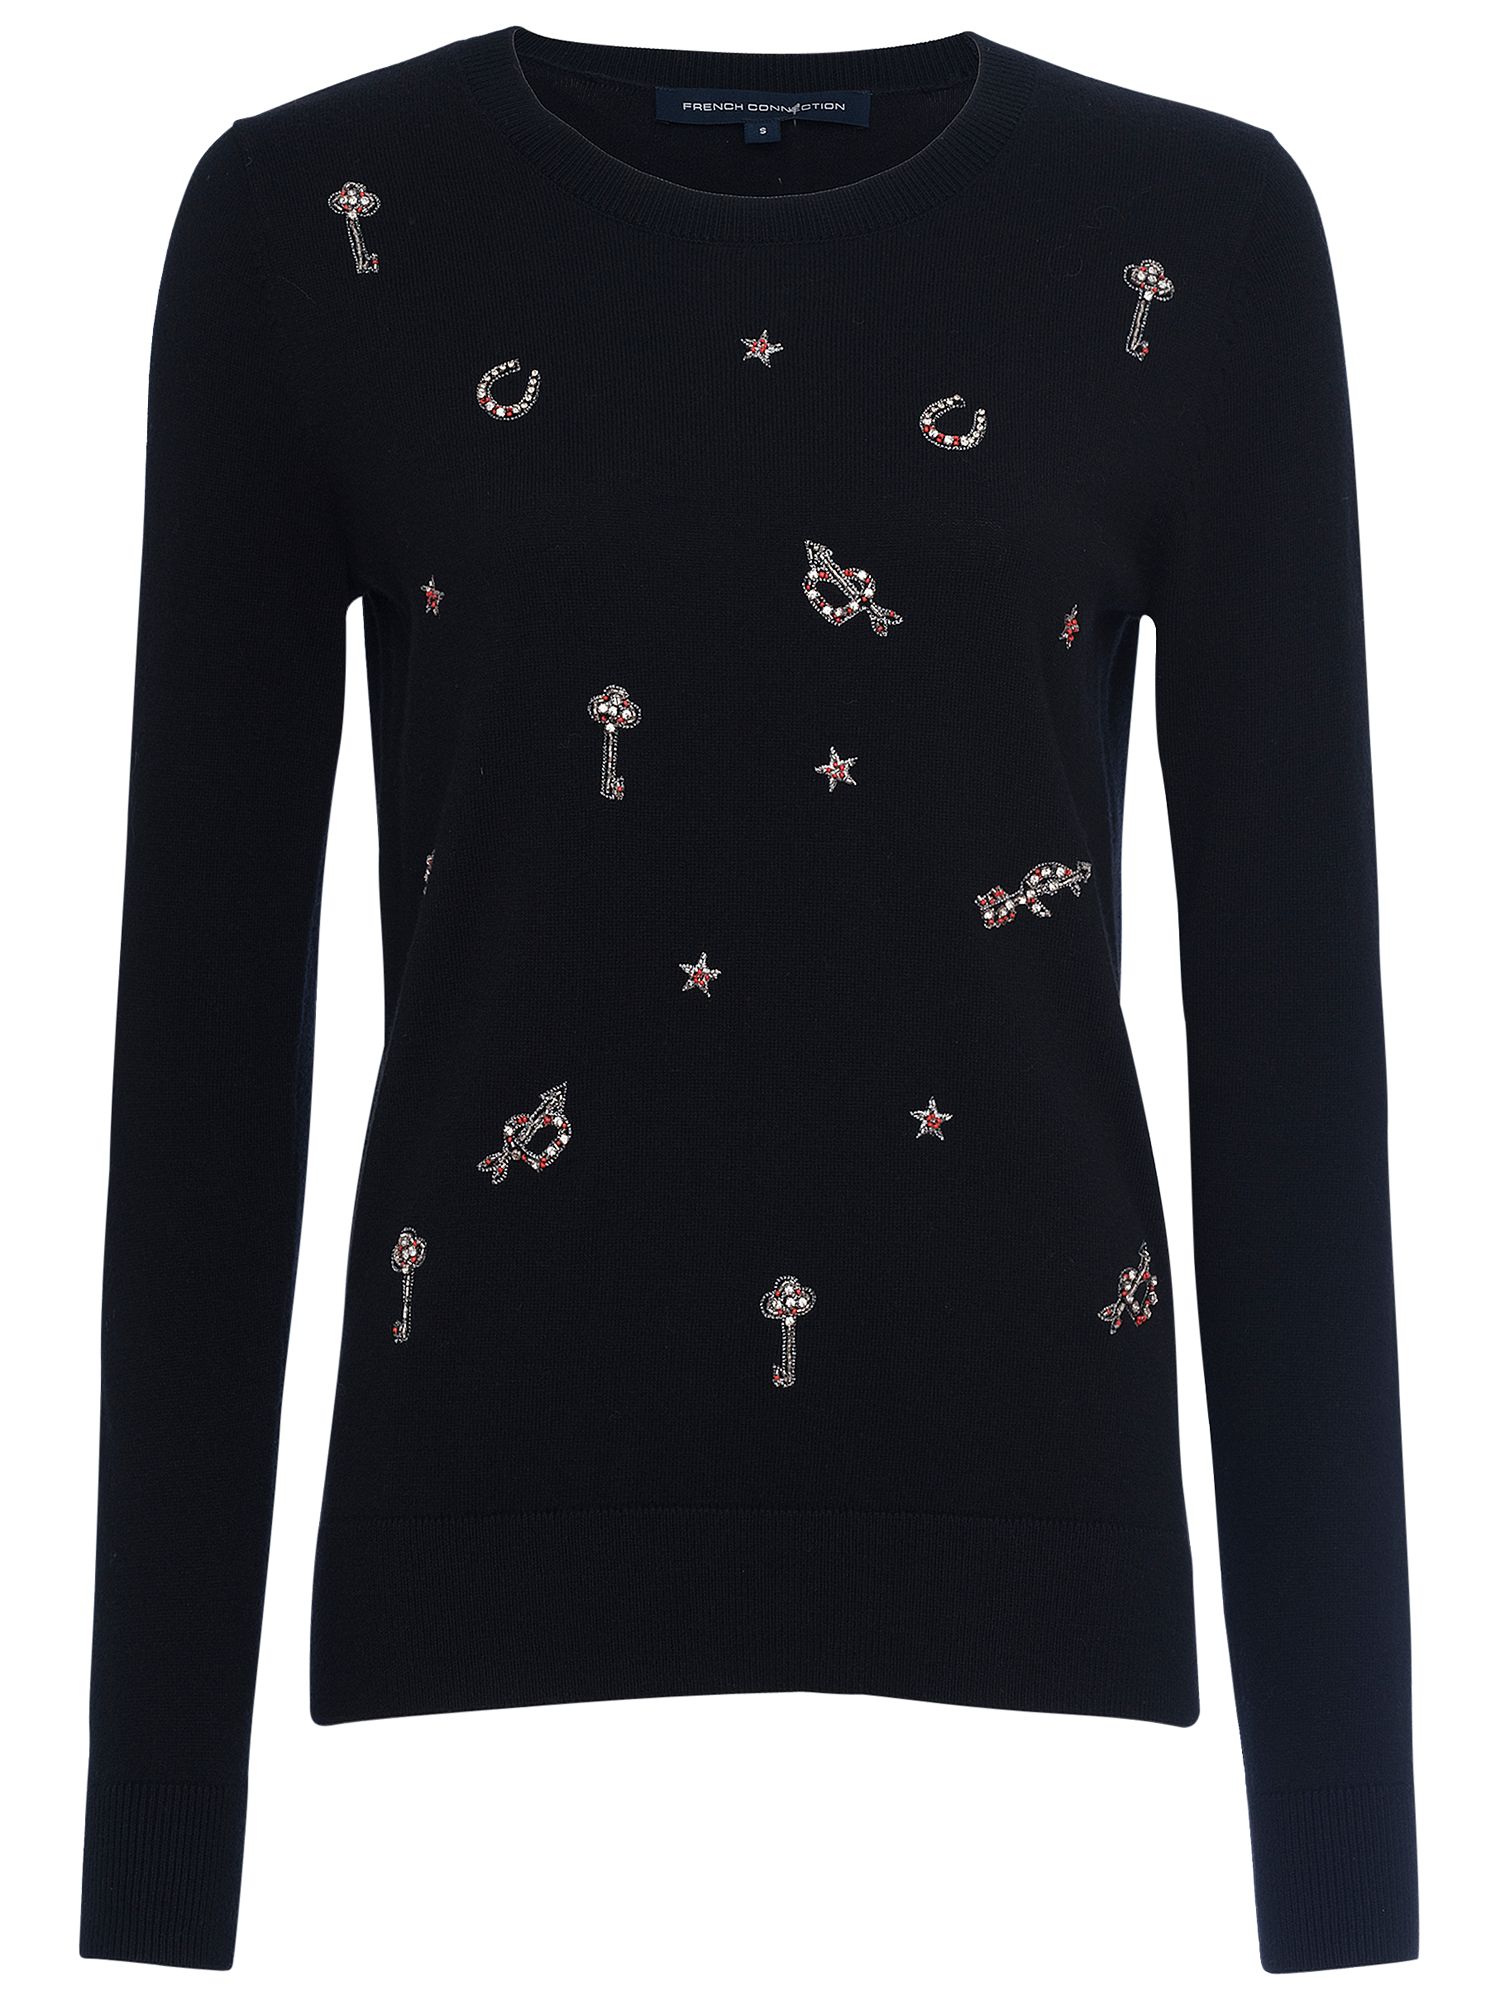 French Connection Key Heart Knit Jumper, Black